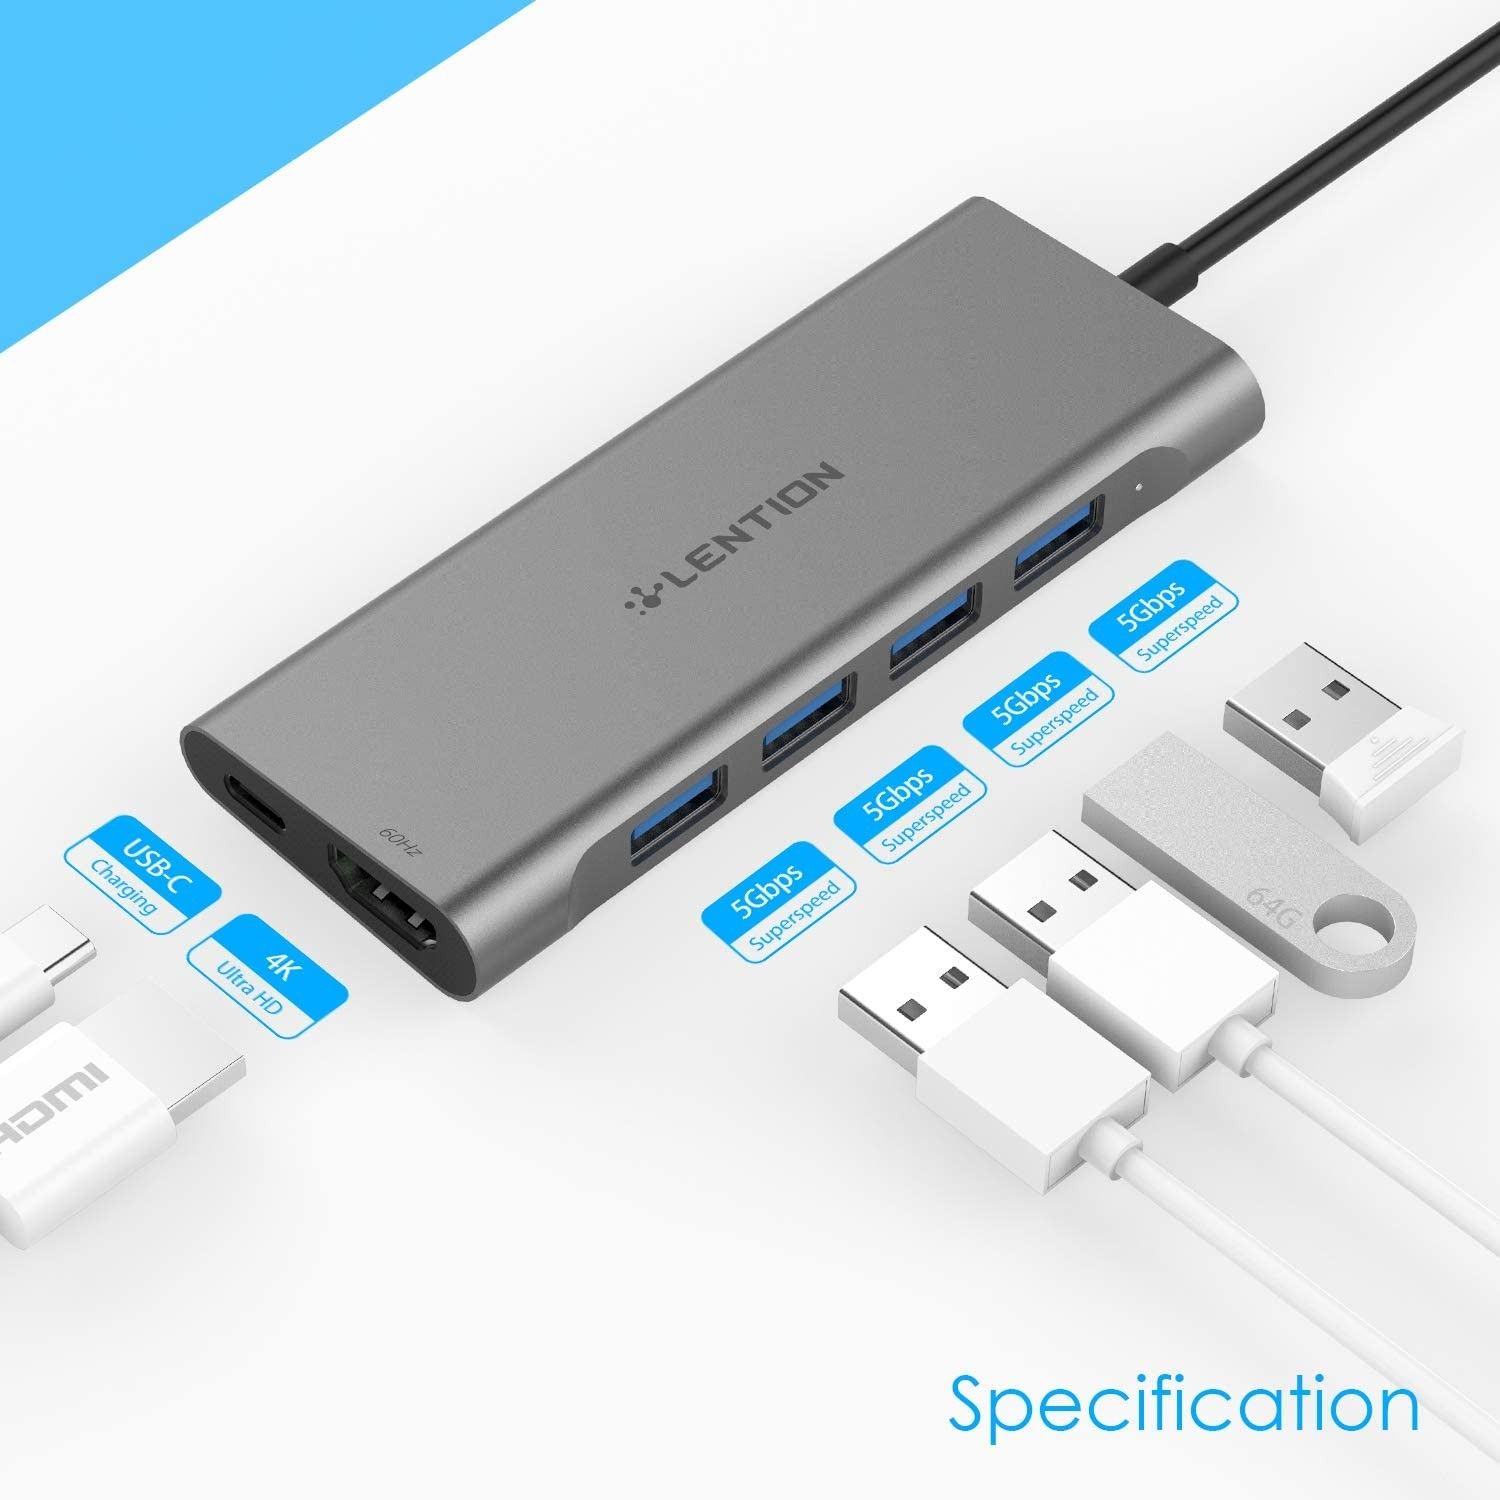 The number and type of ports on the Lention USB-C Hub Multiport Adapter 